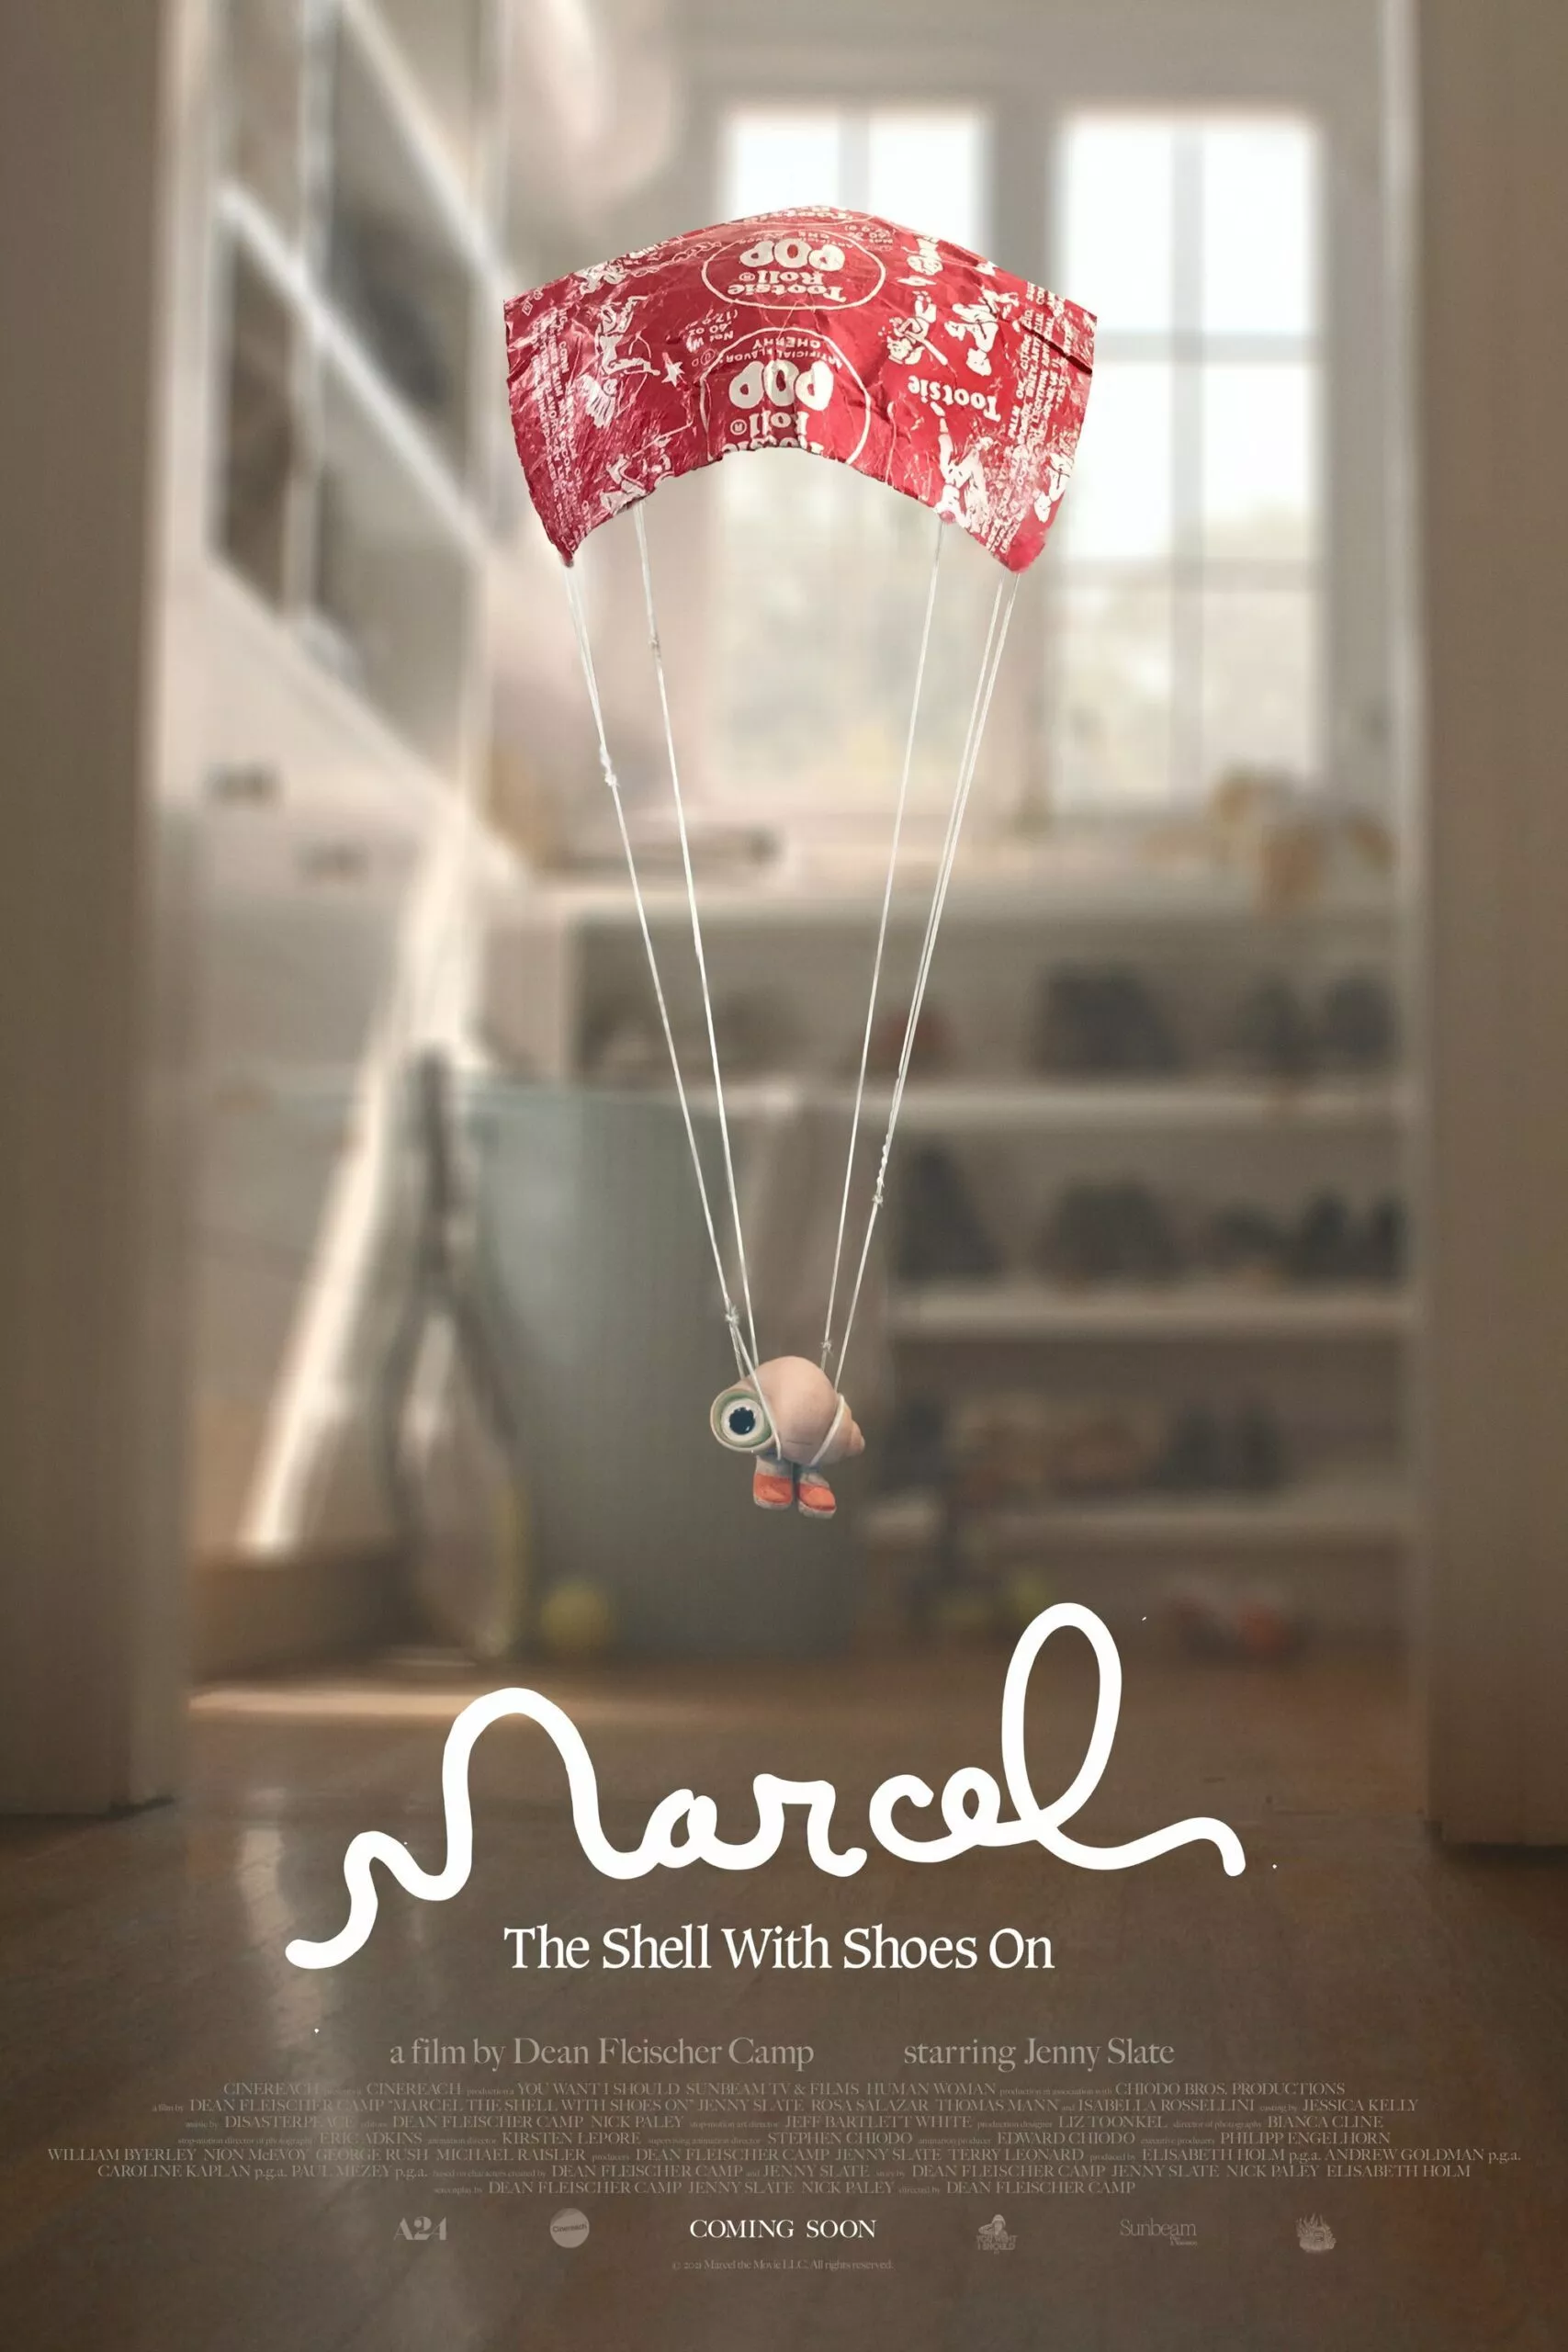 Marcel The Shell With Shoes On | Official Trailer HD | A24